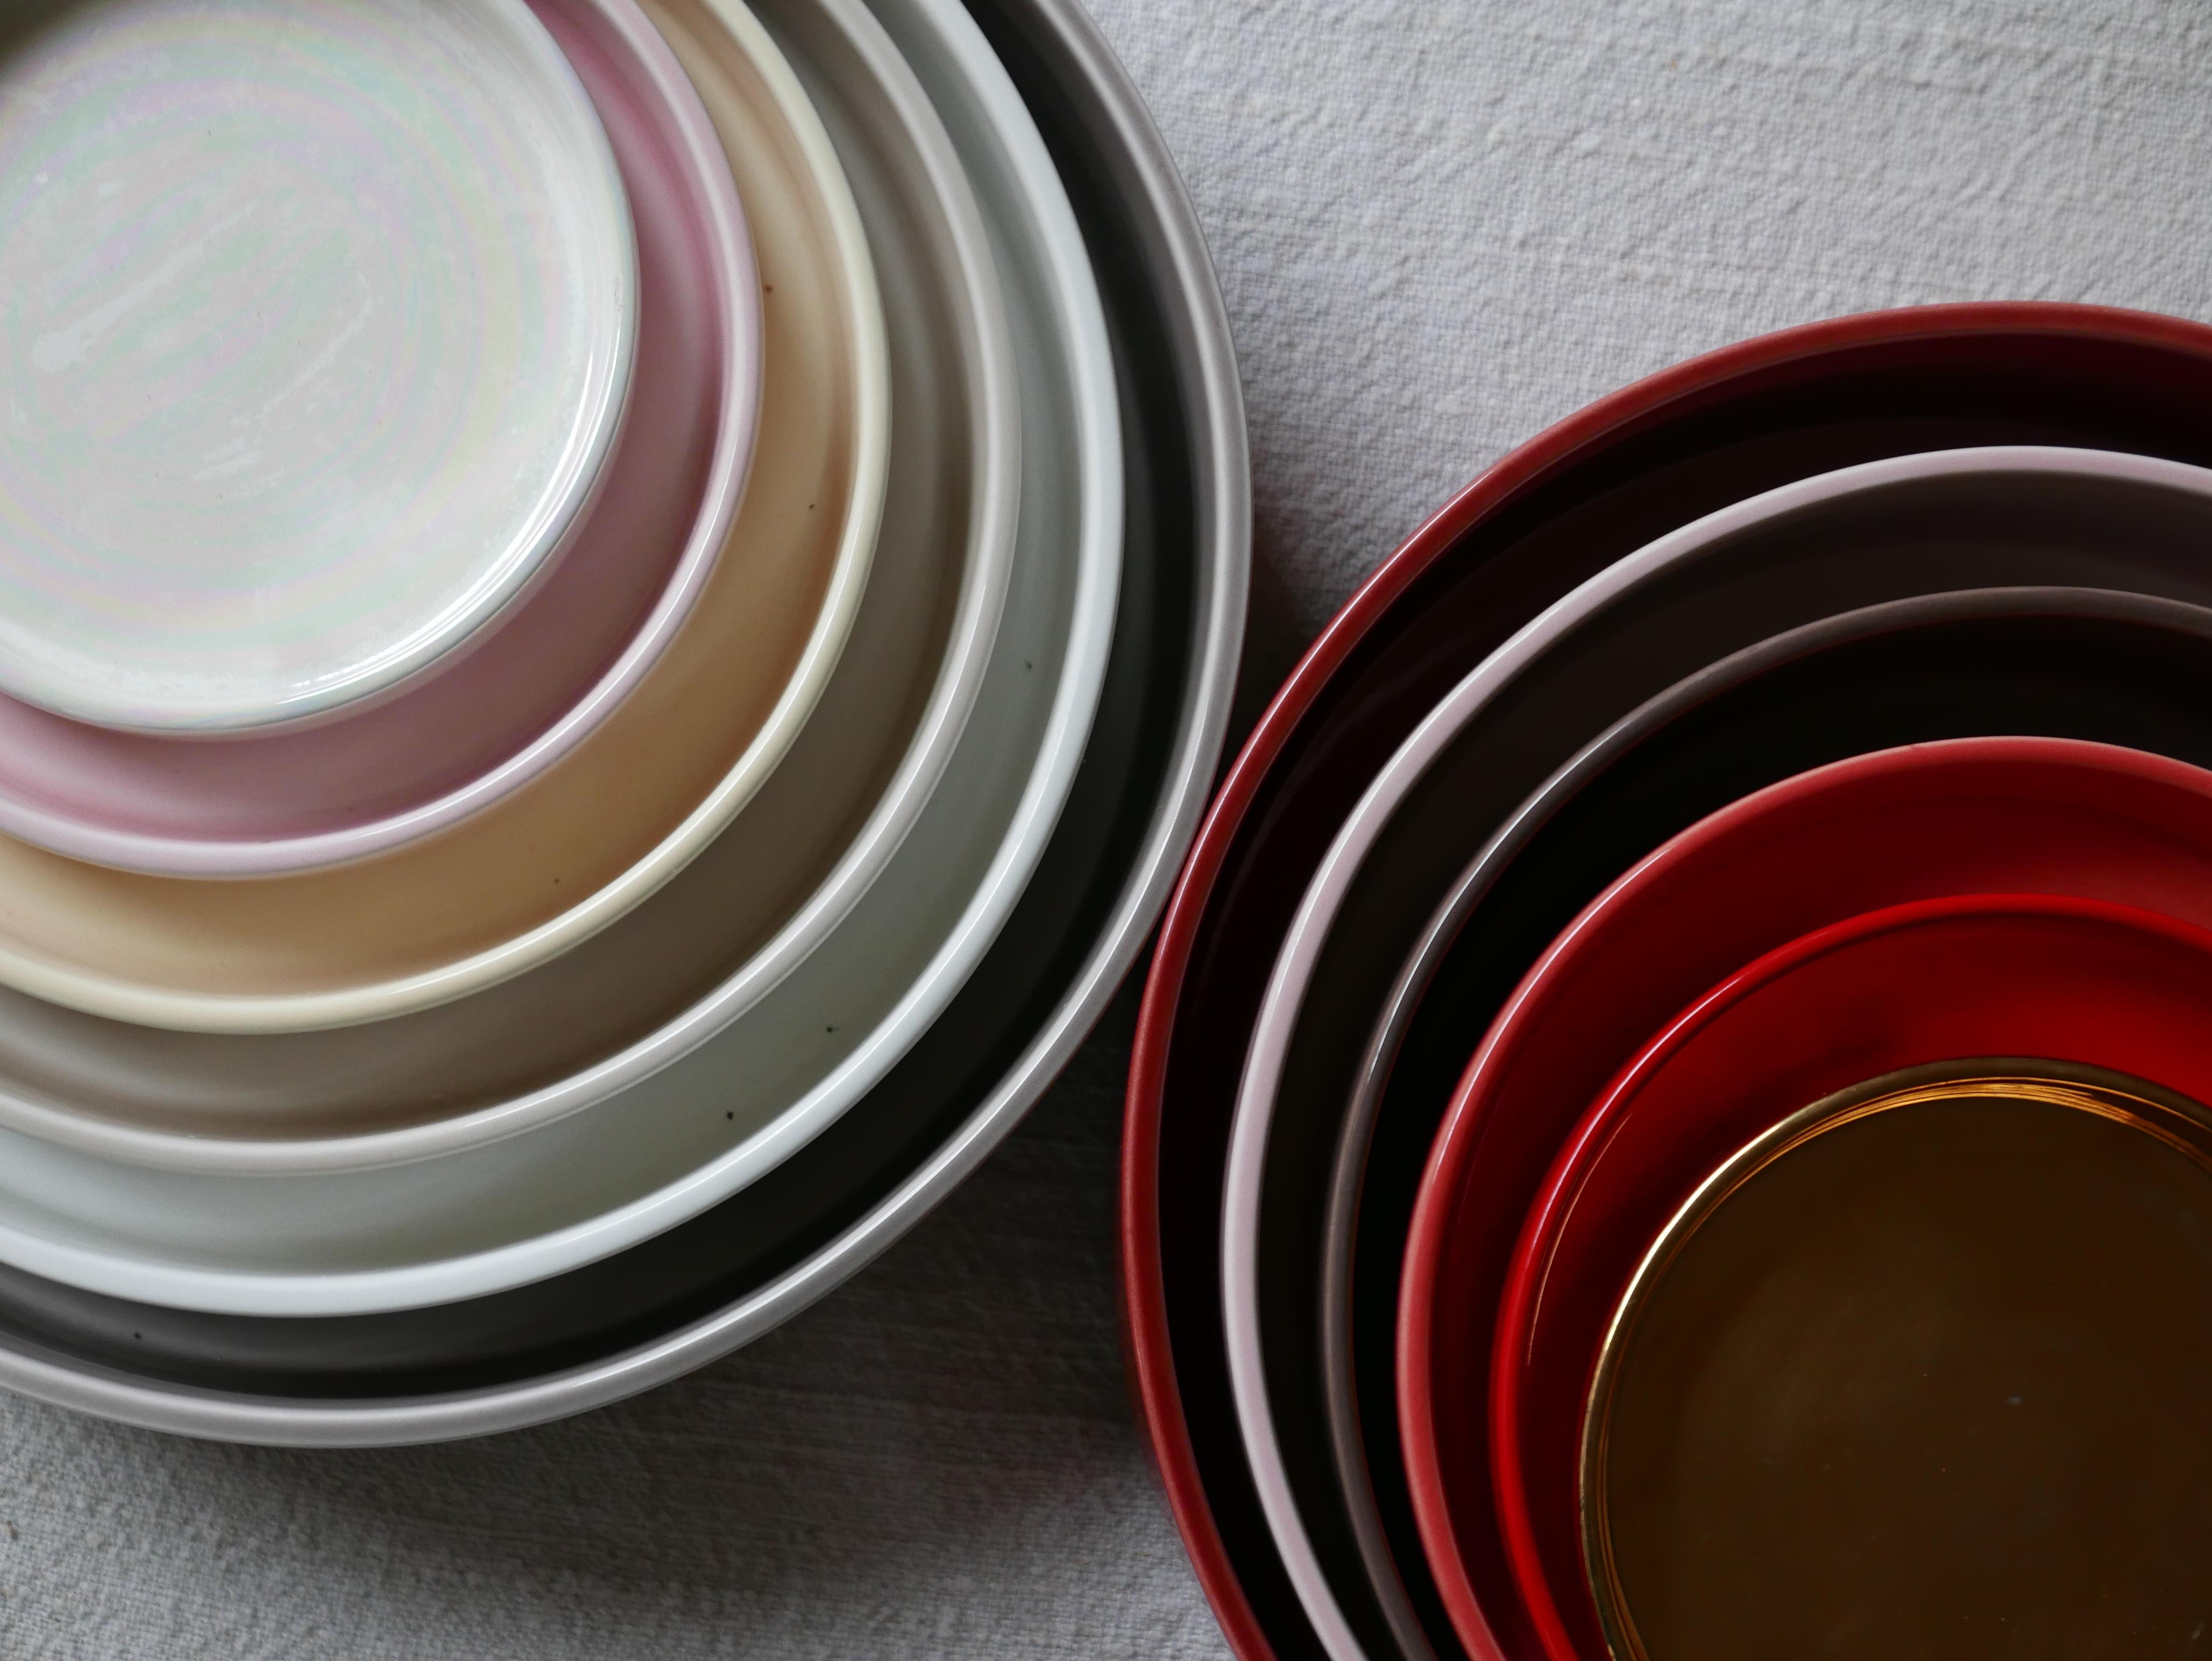 Milano Collection. Set  of 16 concentric ceramic serving round dishes - trays handmade and hand-decorated  of shades of 8 pieces in red and warm colors and 8 pieces in neutral colors, varying diameter and height, and that, once they are inside each